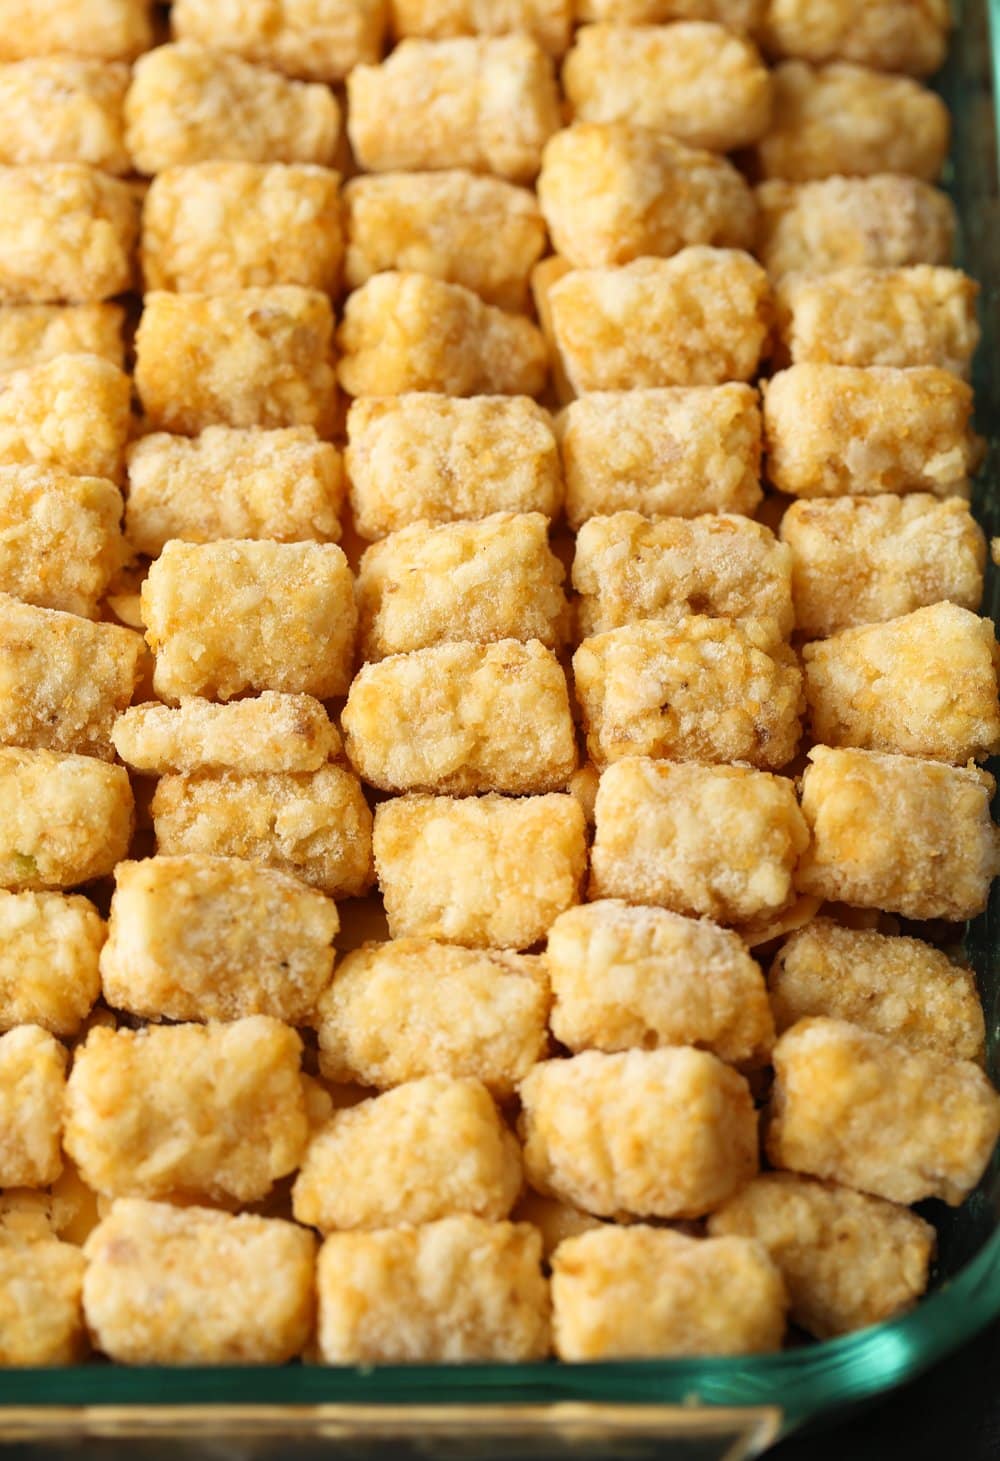 Unbaked hot dish casserole filled with frozen tater tots